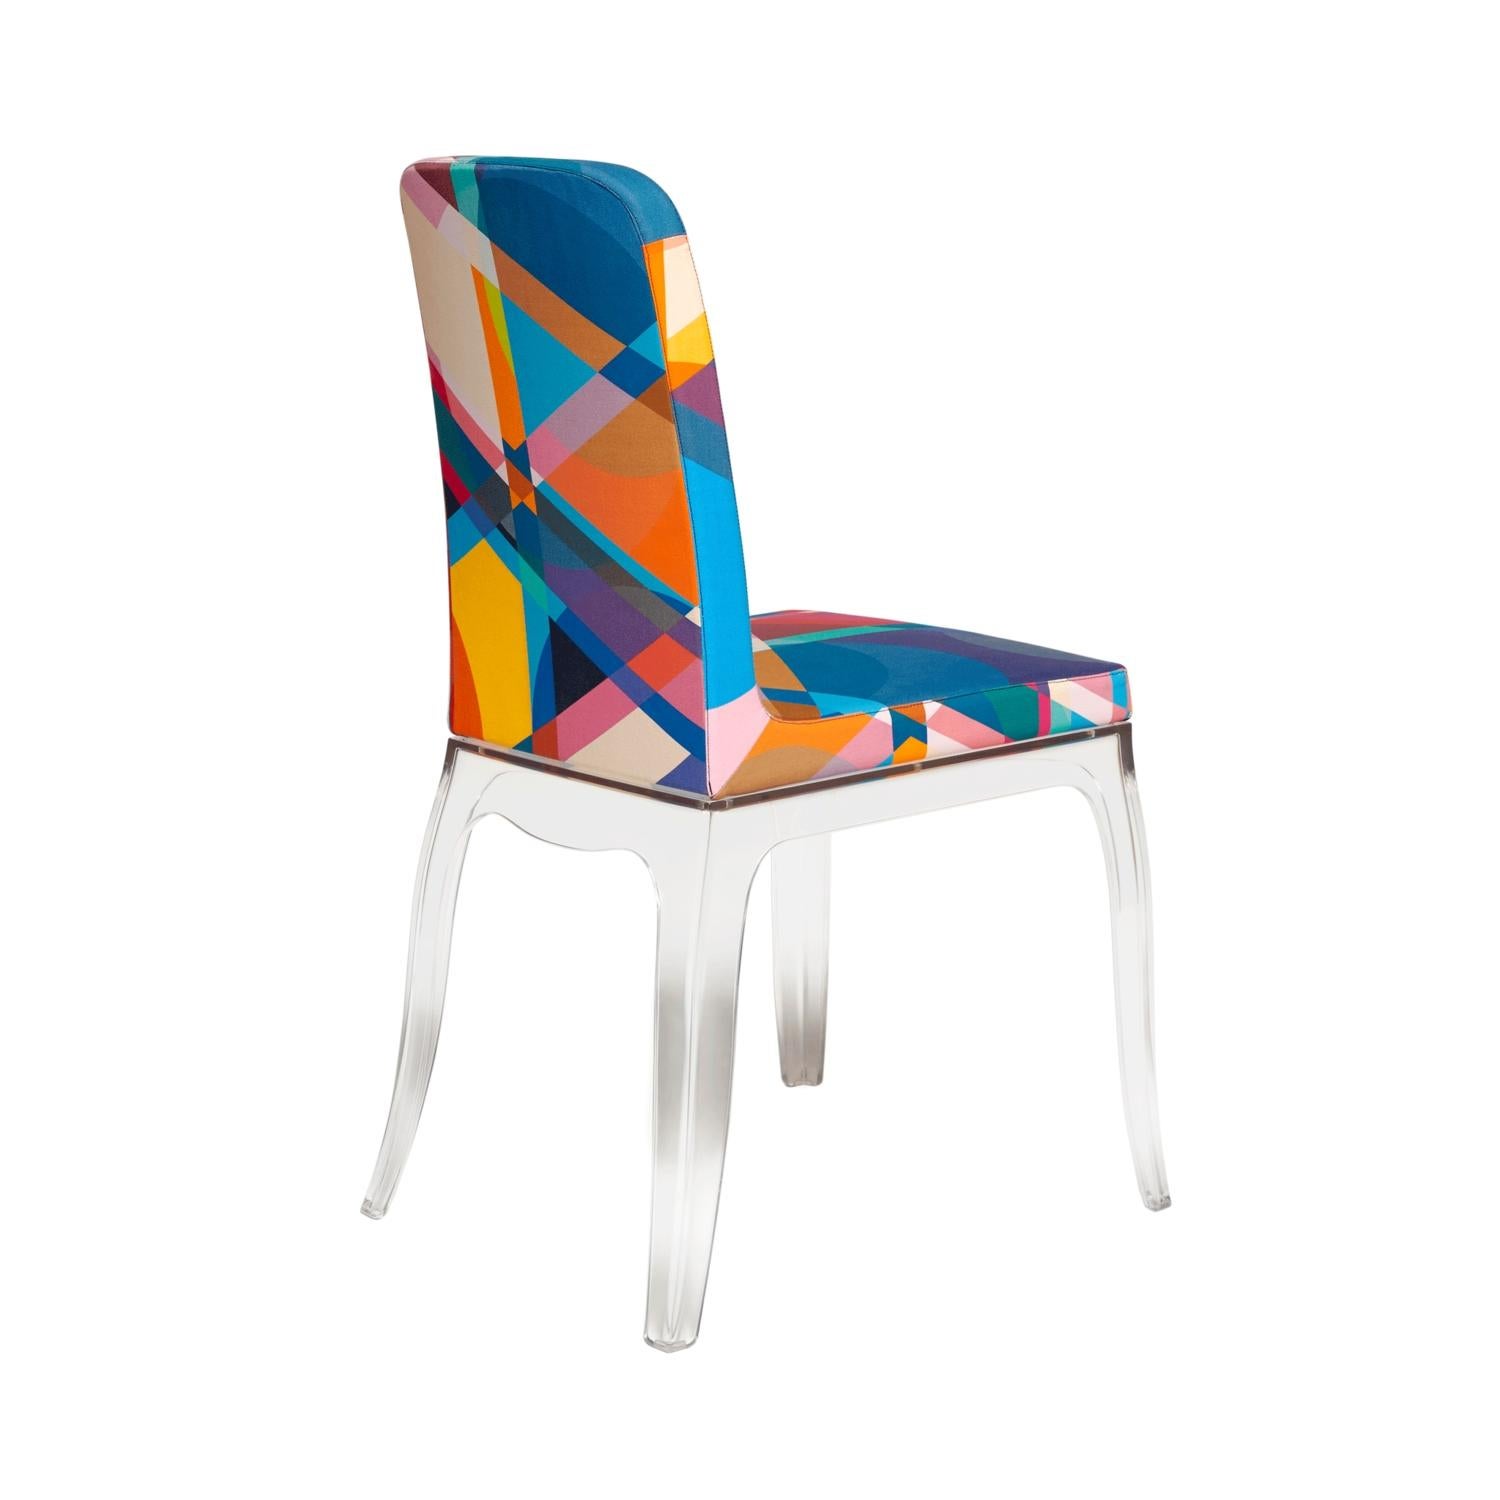 Set of 4 Moibibi Colorful Dining Chairs Designed by Marcel Wanders (Italienisch)